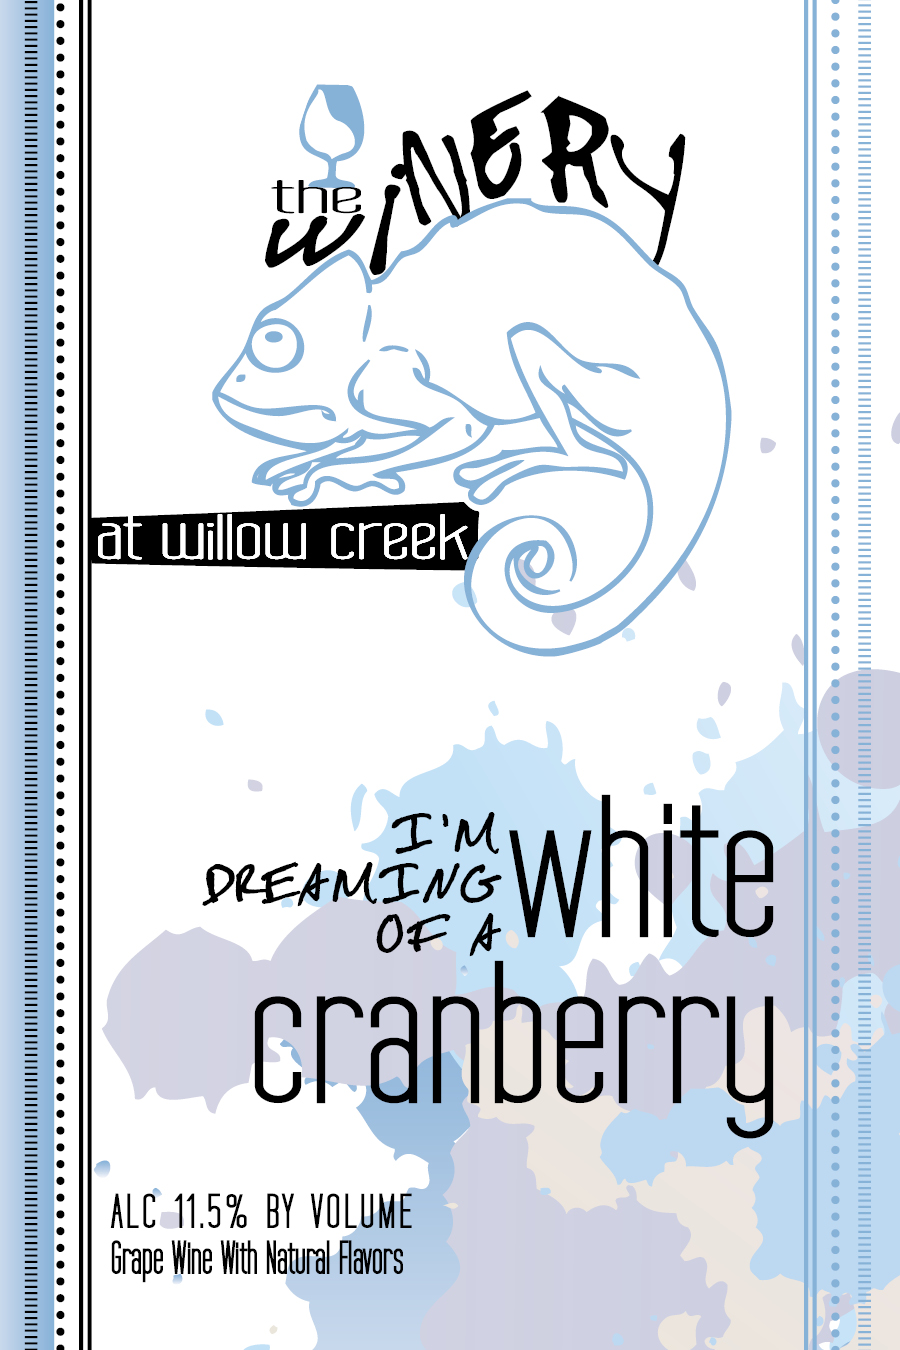 Product Image for White Cranberry Pinot Gris